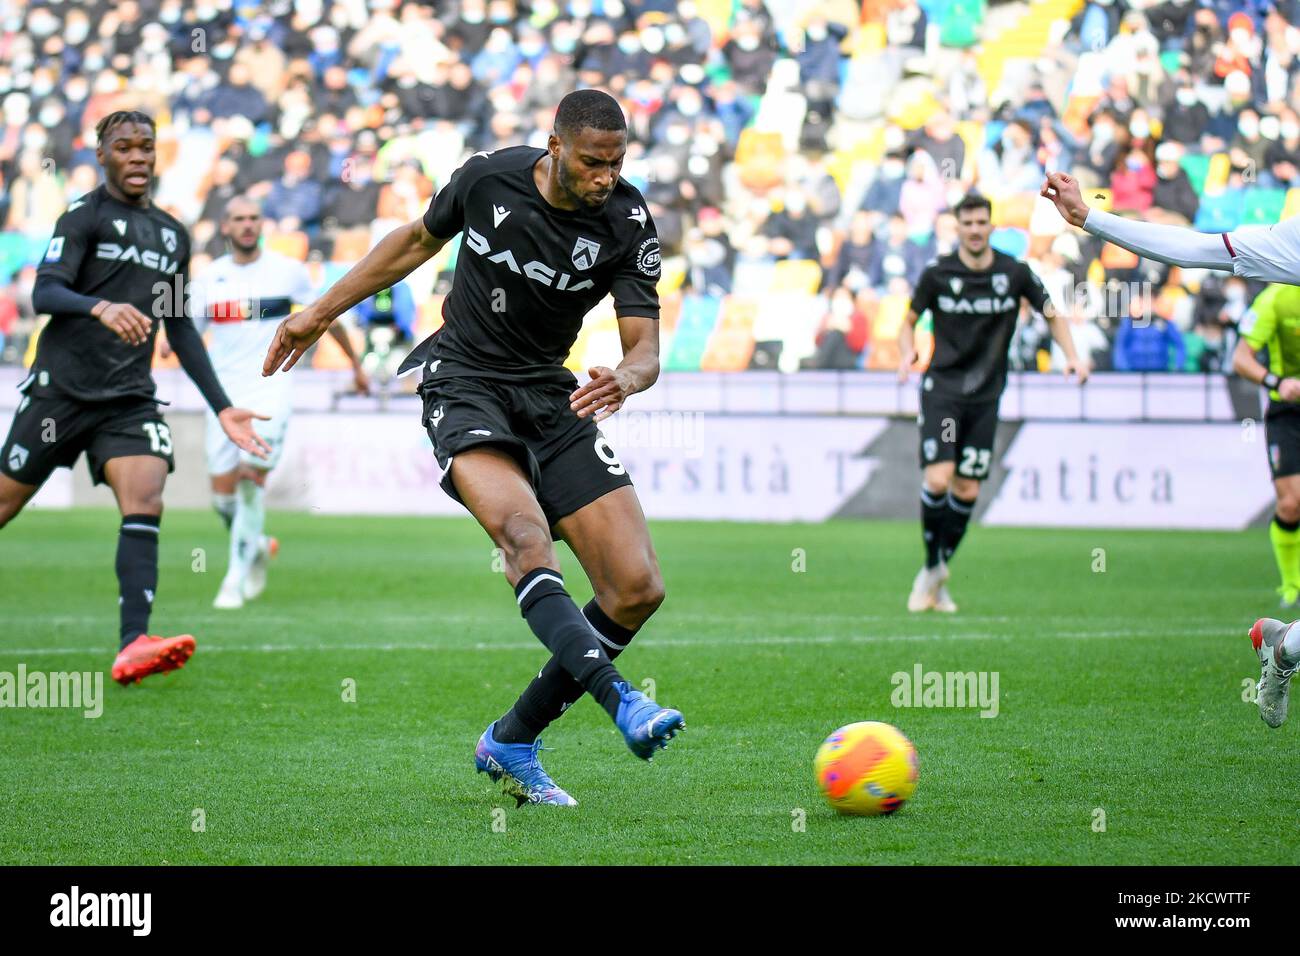 Norberto Bercique Gomes Betuncal (Udinese) tries to score a goal during the italian soccer Serie A match Udinese Calcio vs Genoa CFC on November 28, 2021 at the Friuli - Dacia Arena stadium in Udine, Italy (Photo by Ettore Griffoni/LiveMedia/NurPhoto) Stock Photo